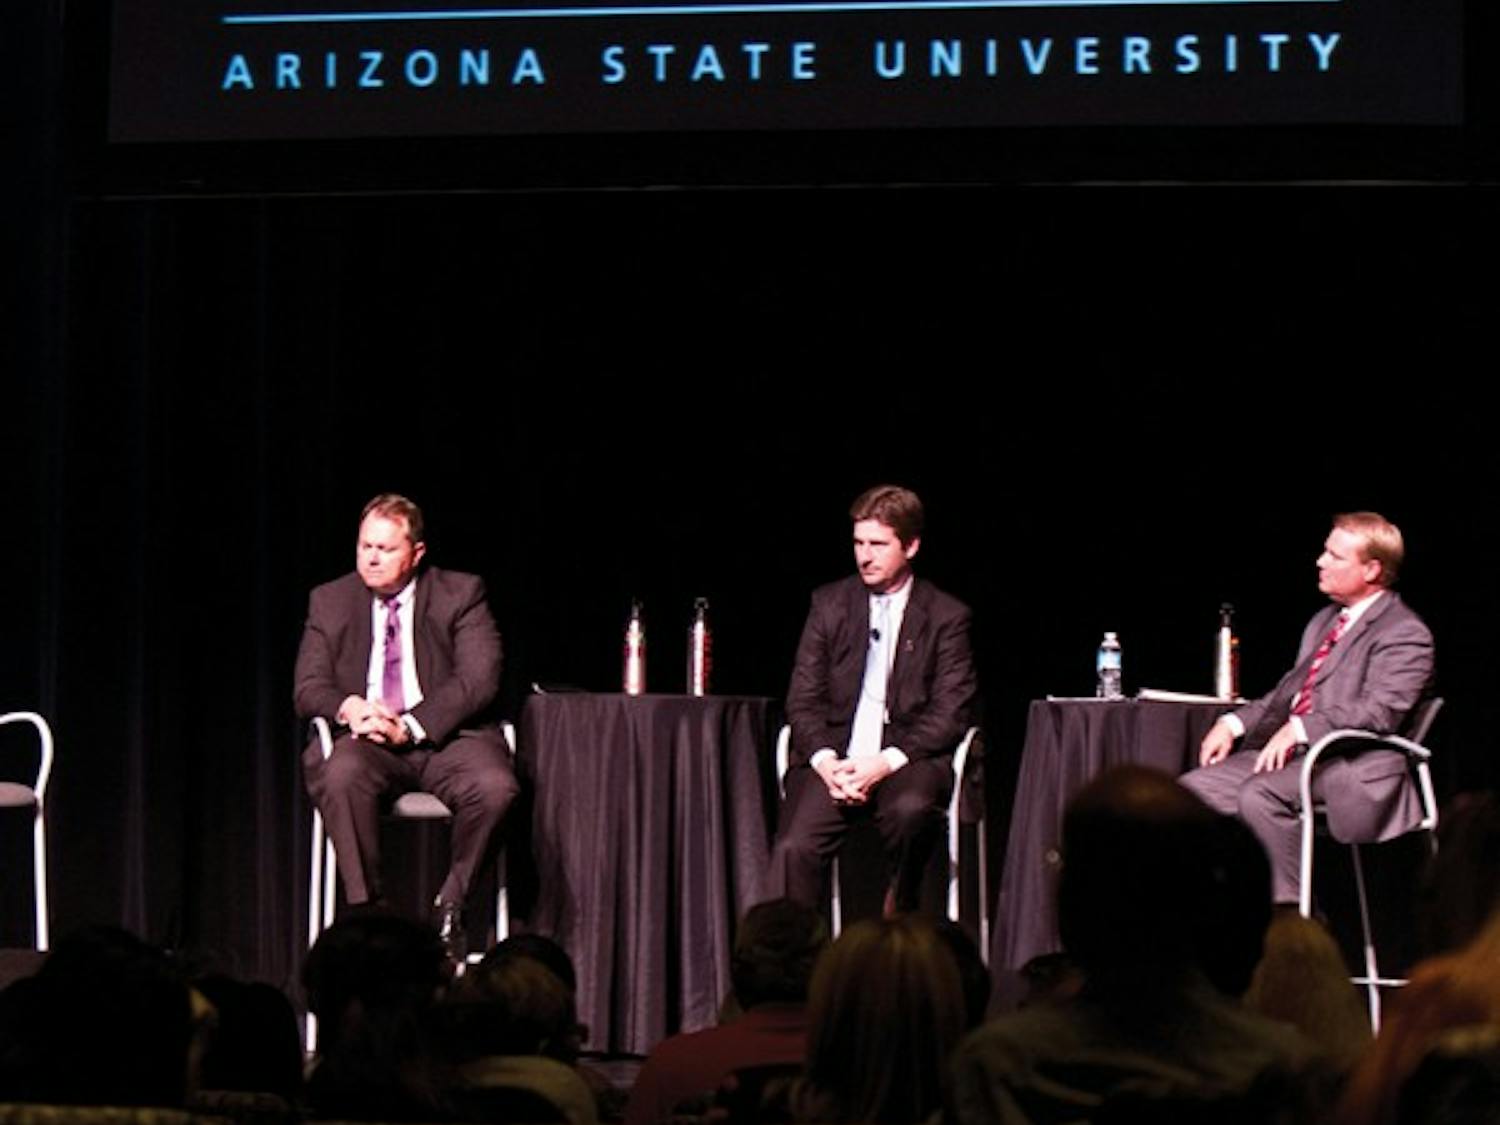 Mayors Scott Smith of Mesa, Greg Stanton of Phoenix, and Mark Mitchell of Tempe (from left to right)  discussed planning for sustainability in their cities Tuesday night at the Mesa Arts Center. (Photo by Vince Dwyer)